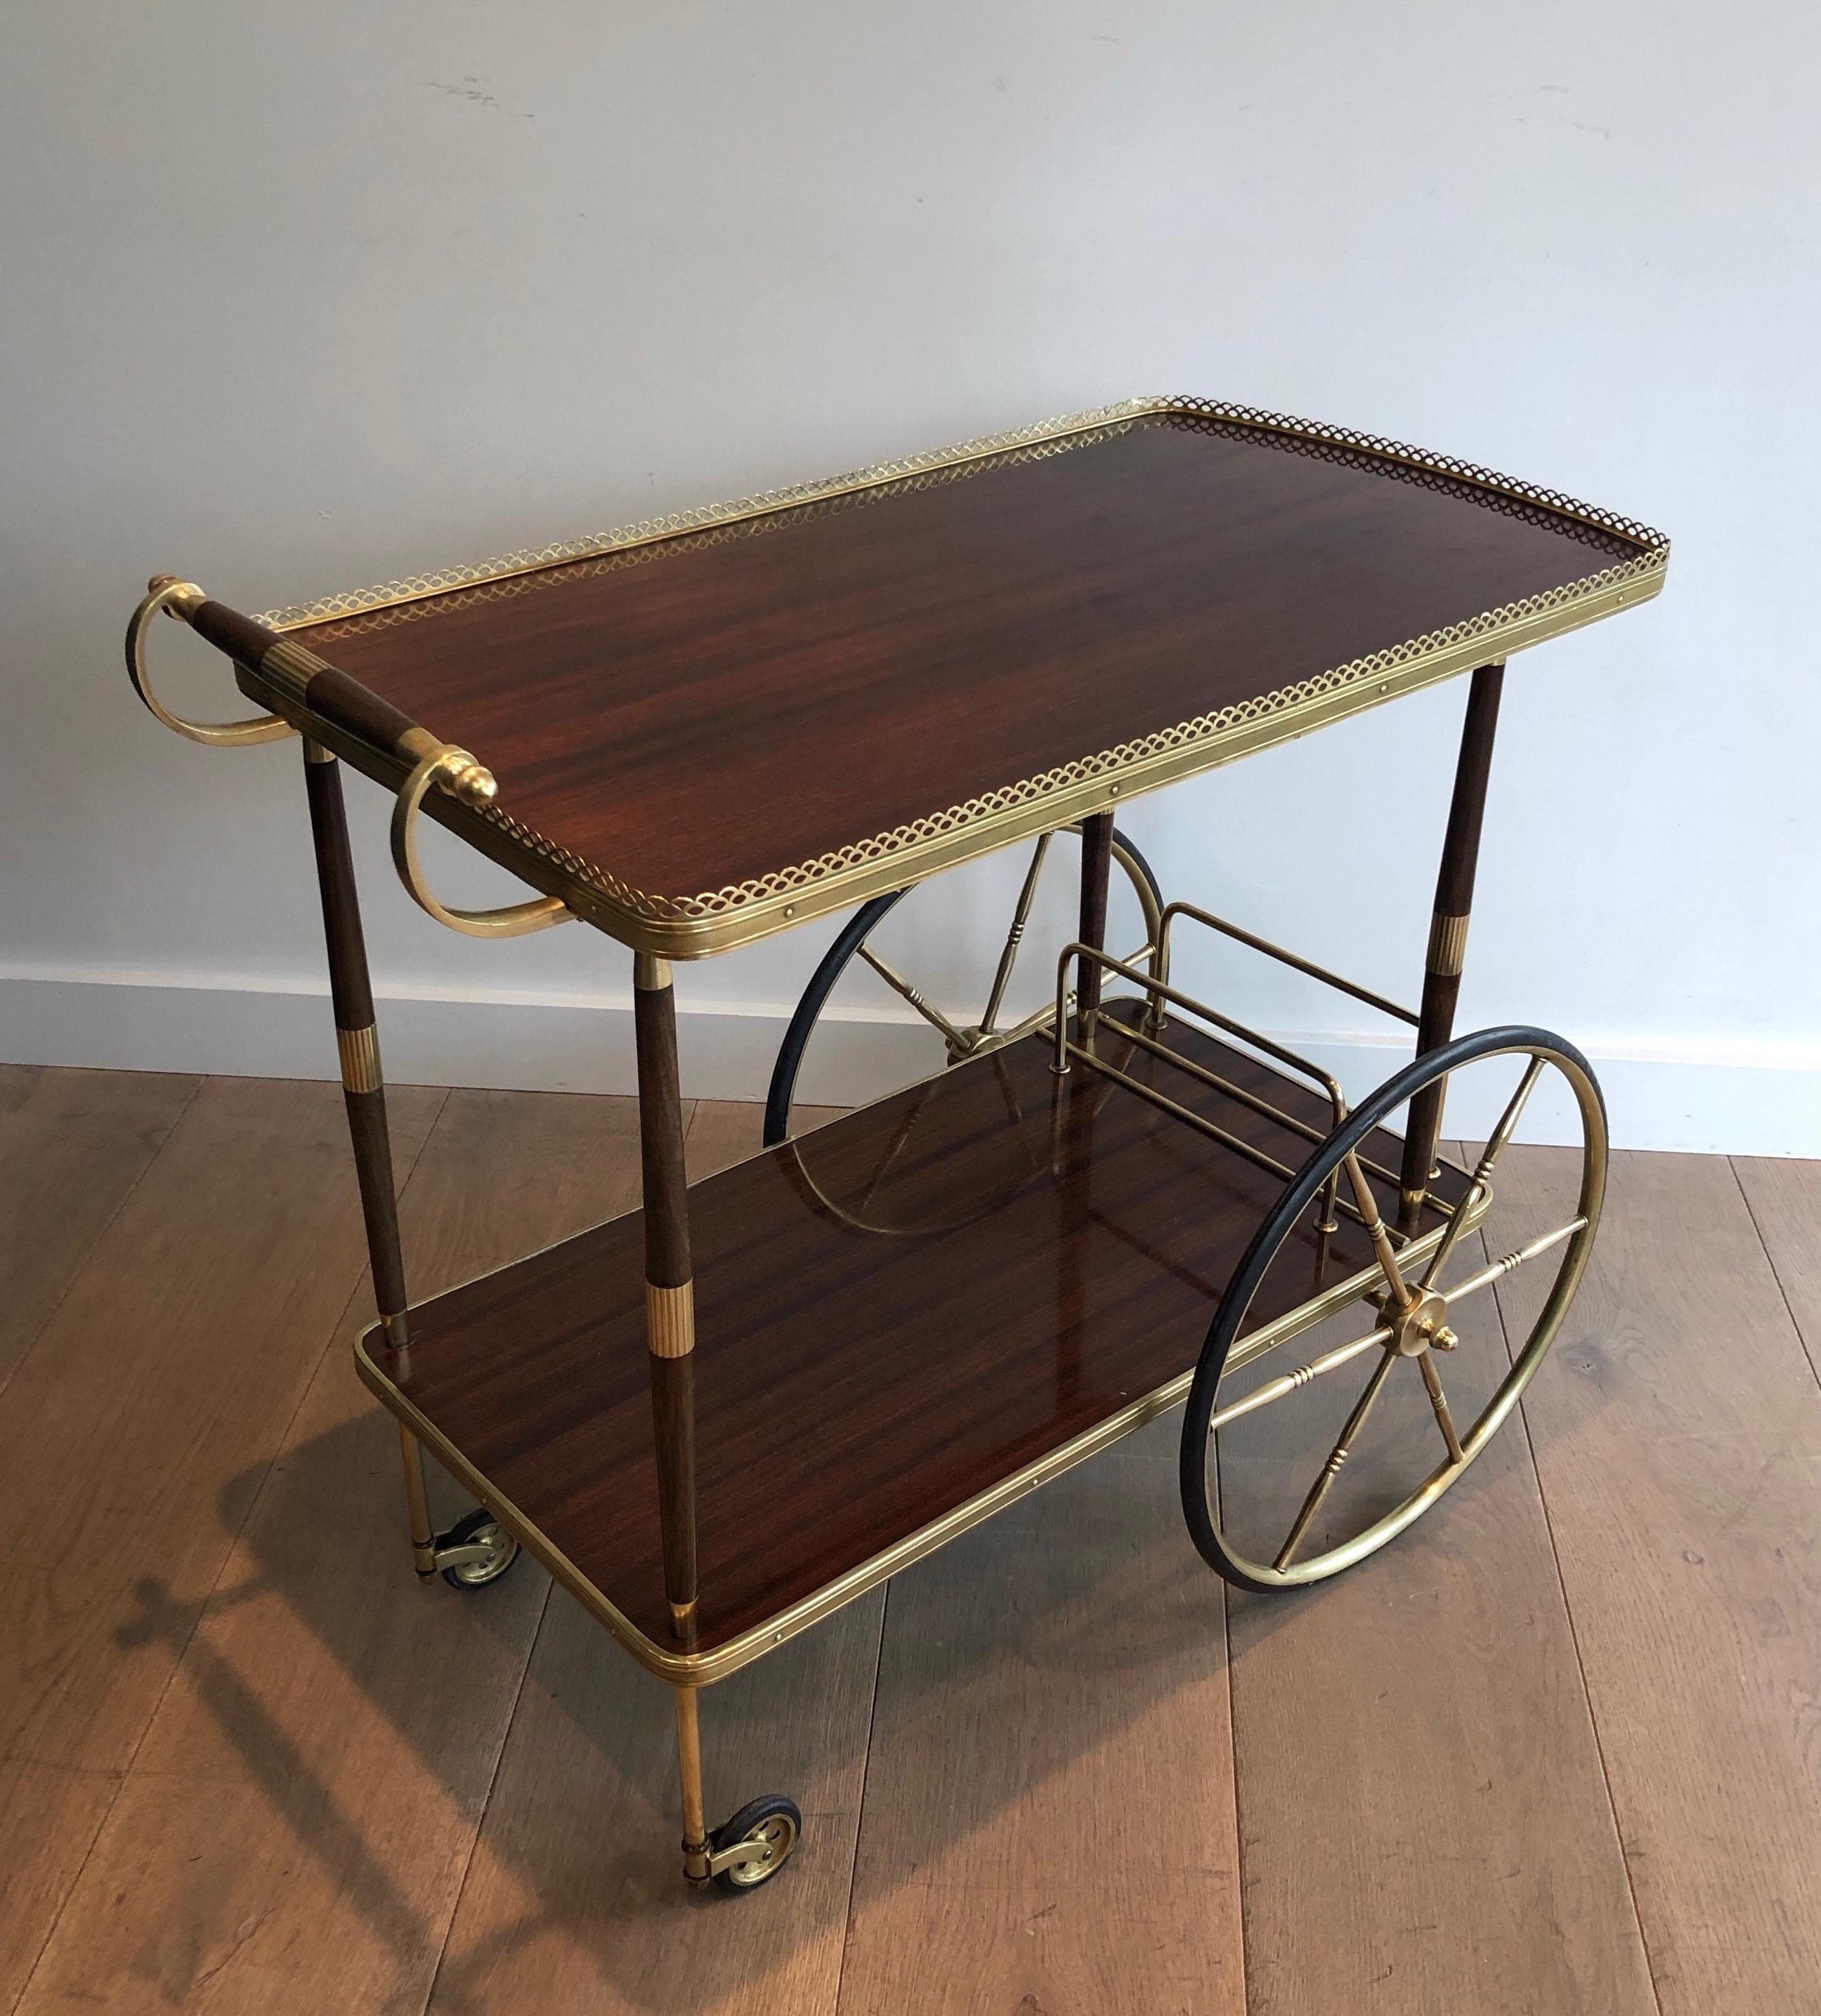 This elegant neoclassical style bar cart is made of wood and brass. This is a French work in the style of famous designer Maison Jansen. Circa 1940.